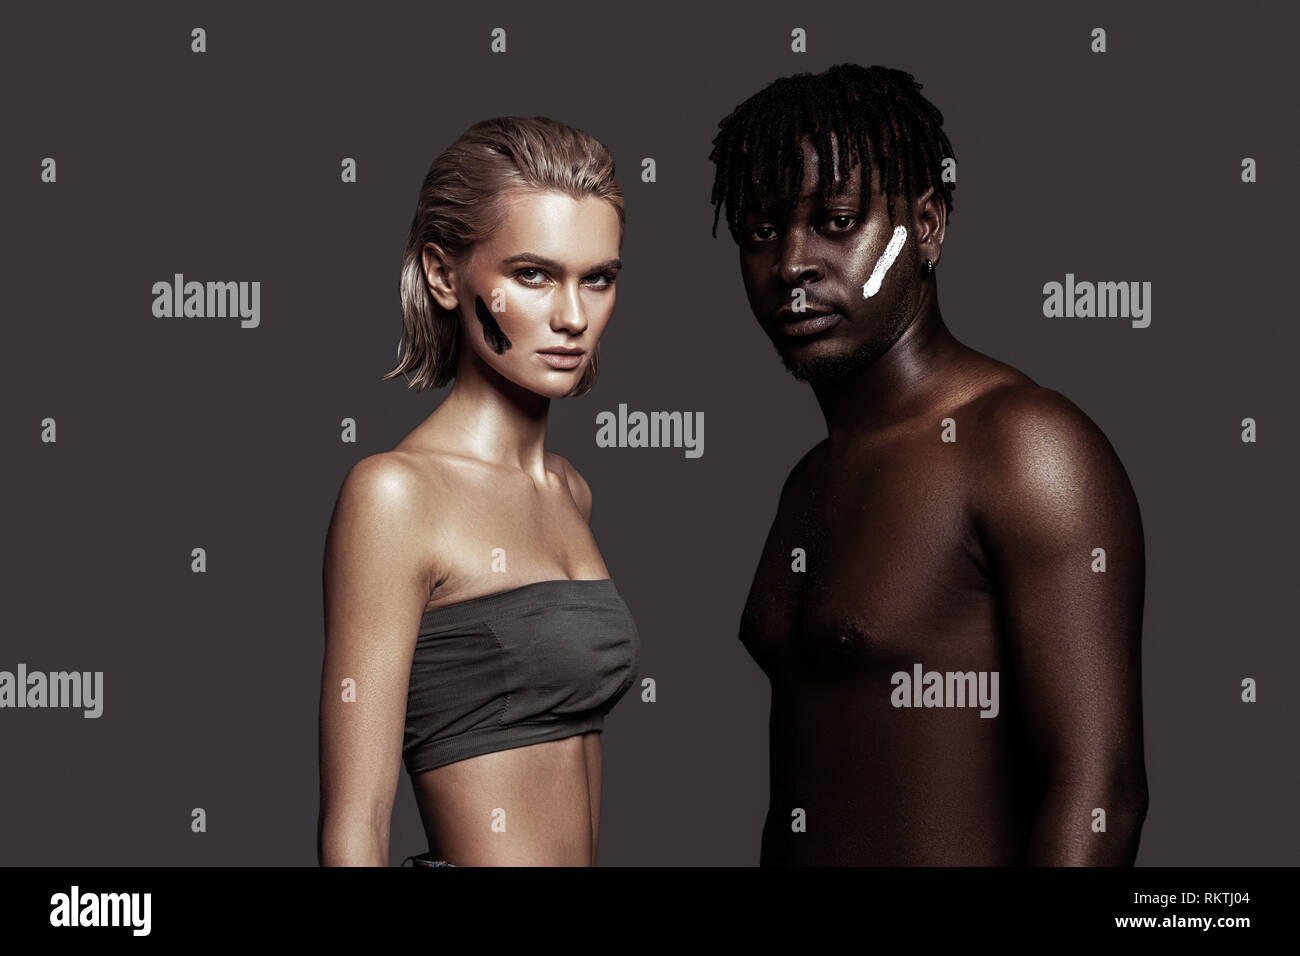 Slim appealing models with different skin color posing together Stock Photo  - Alamy